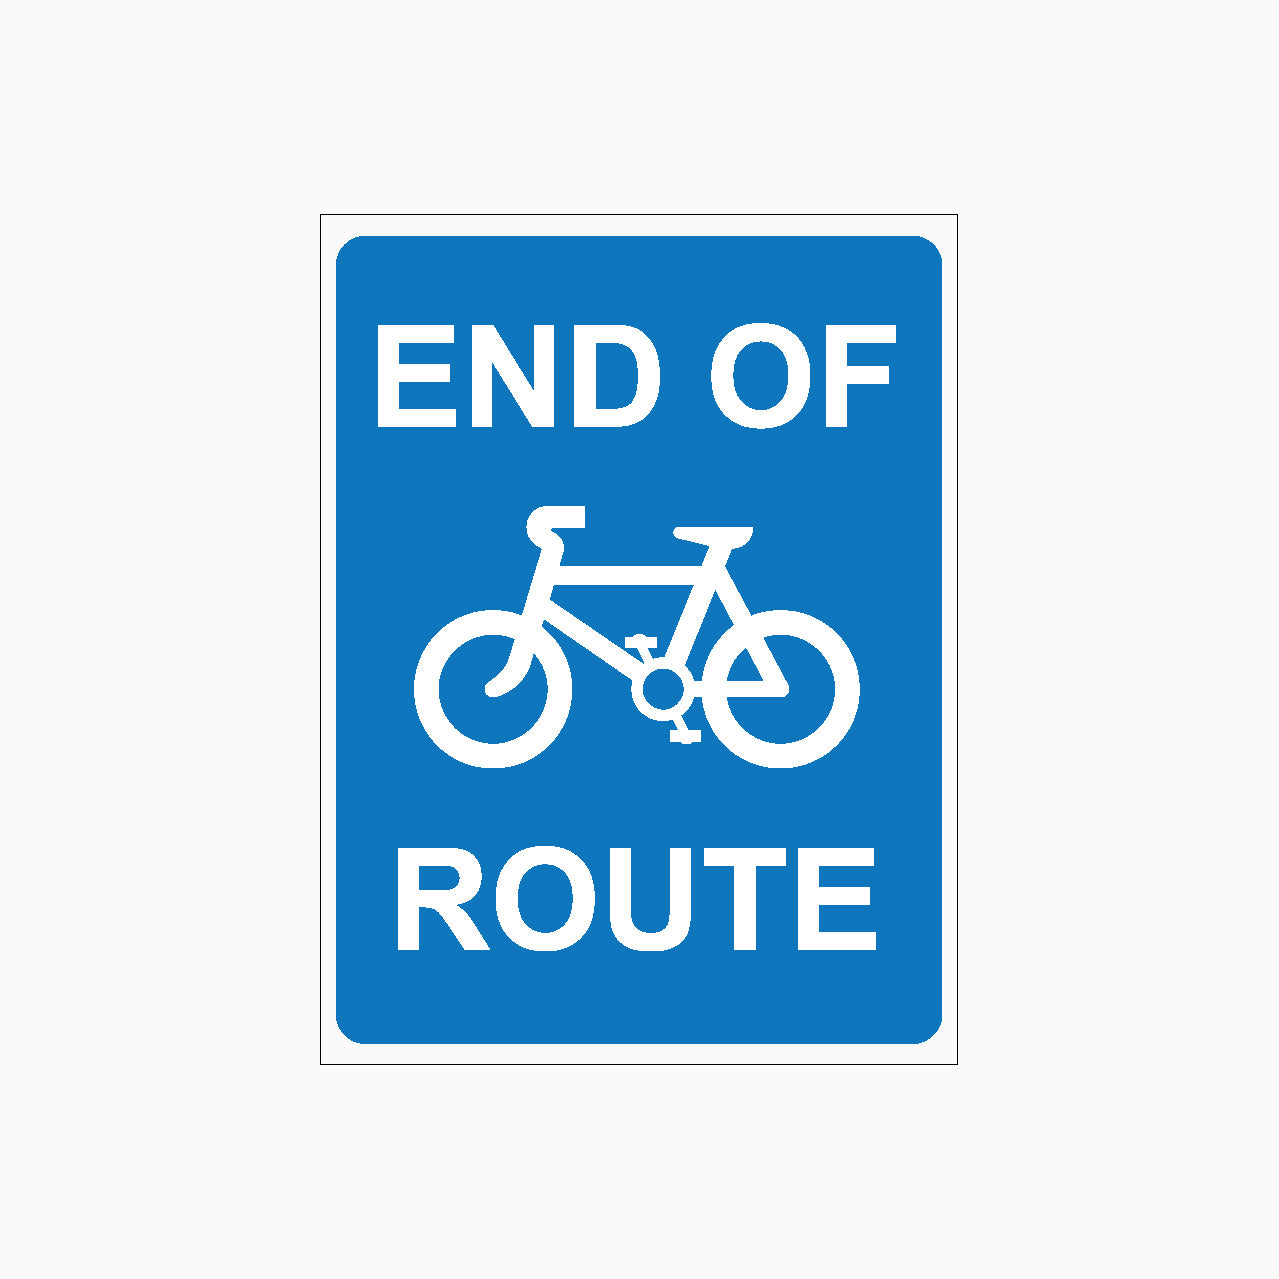 END OF CYCLE ROUTE SIGN